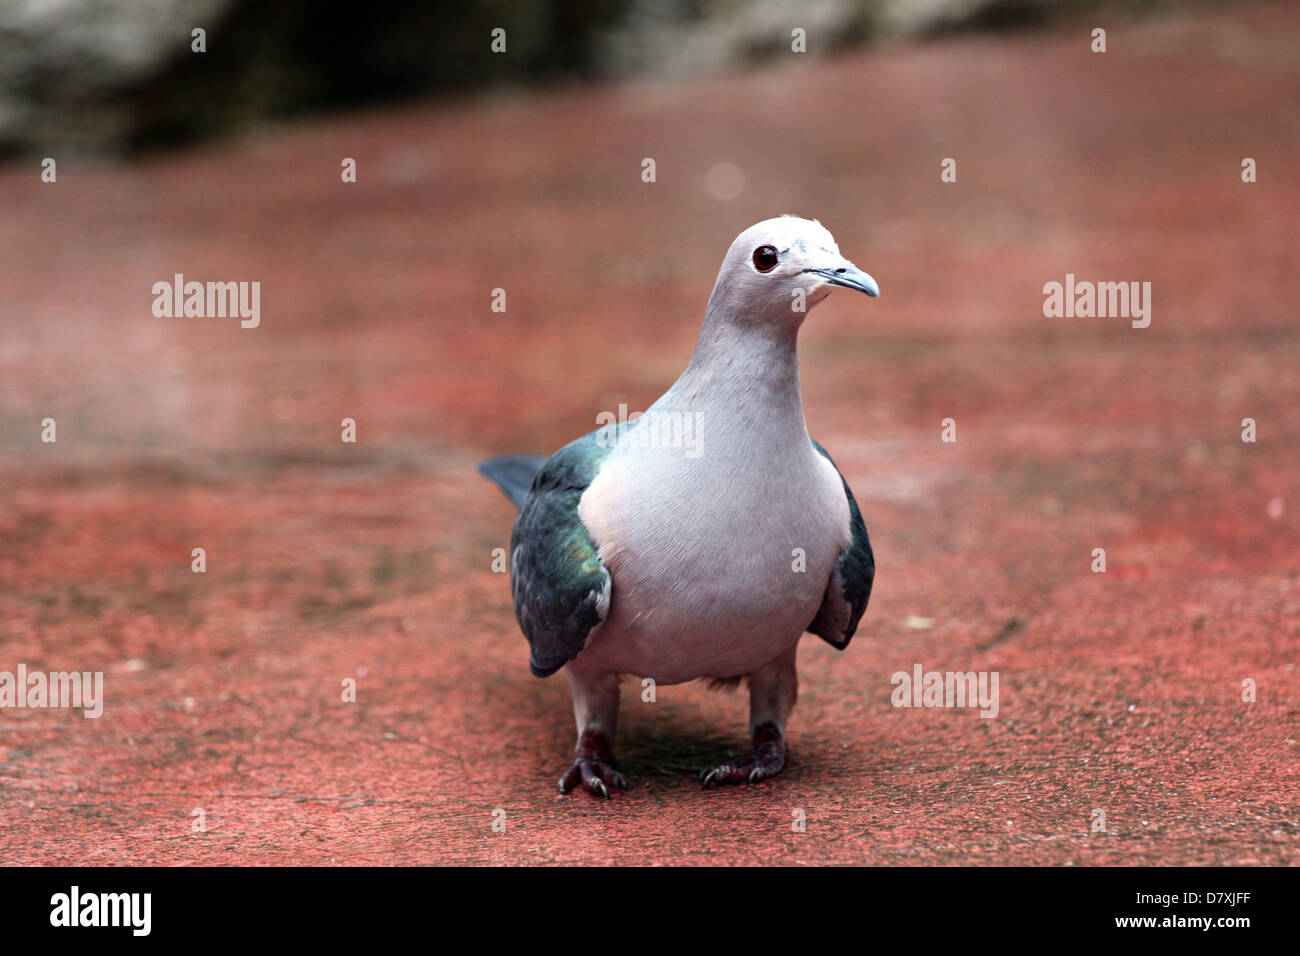 Pigeons were walking to find food. Stock Photo